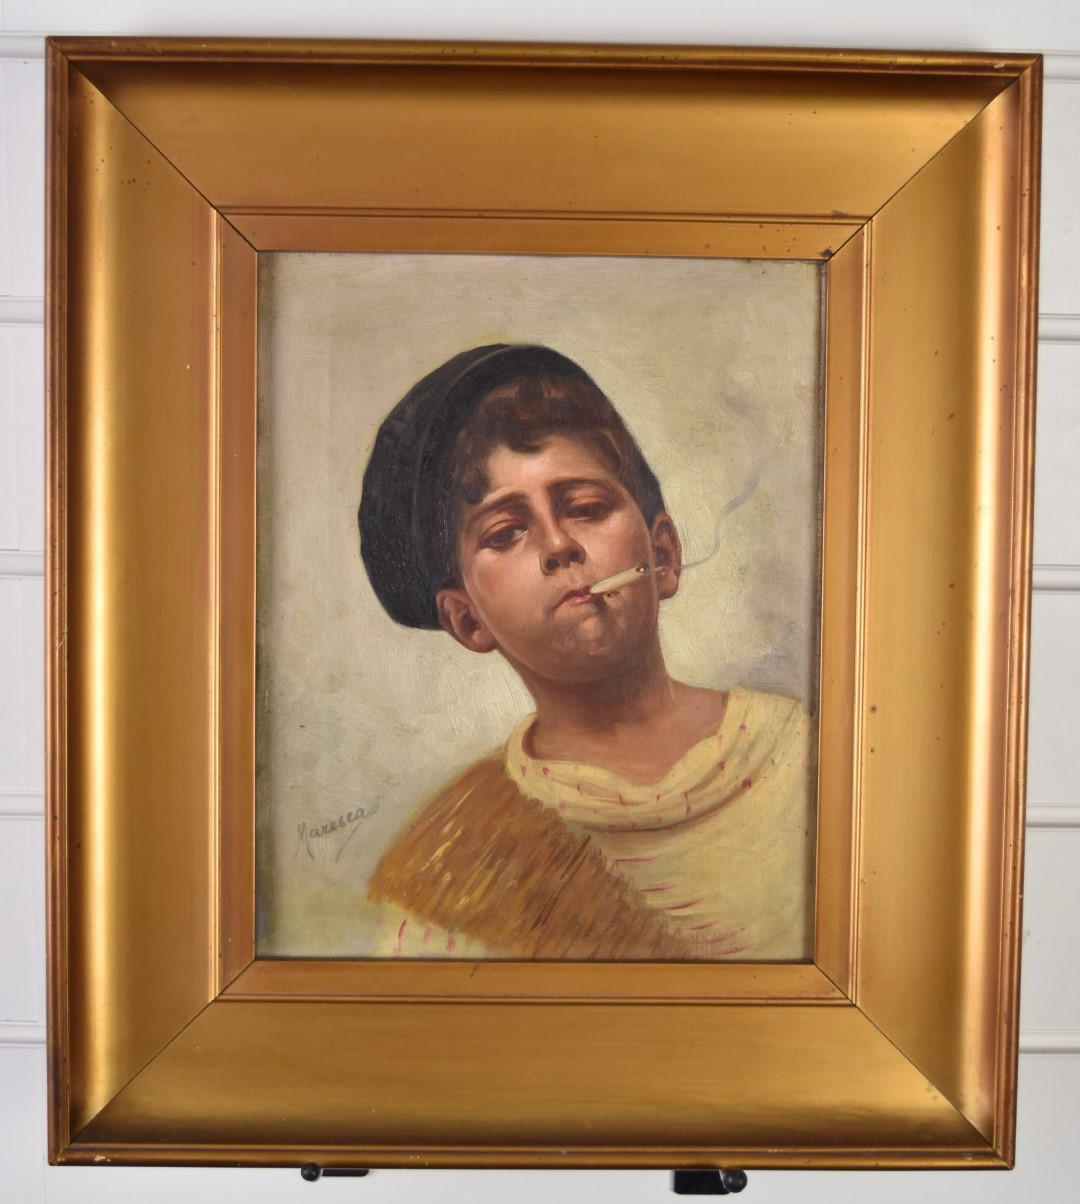 Vincenzo Maresca (19thC Italian) portrait of a boy smoking, signed lower left, 27 x 21cm, in gilt - Image 2 of 5